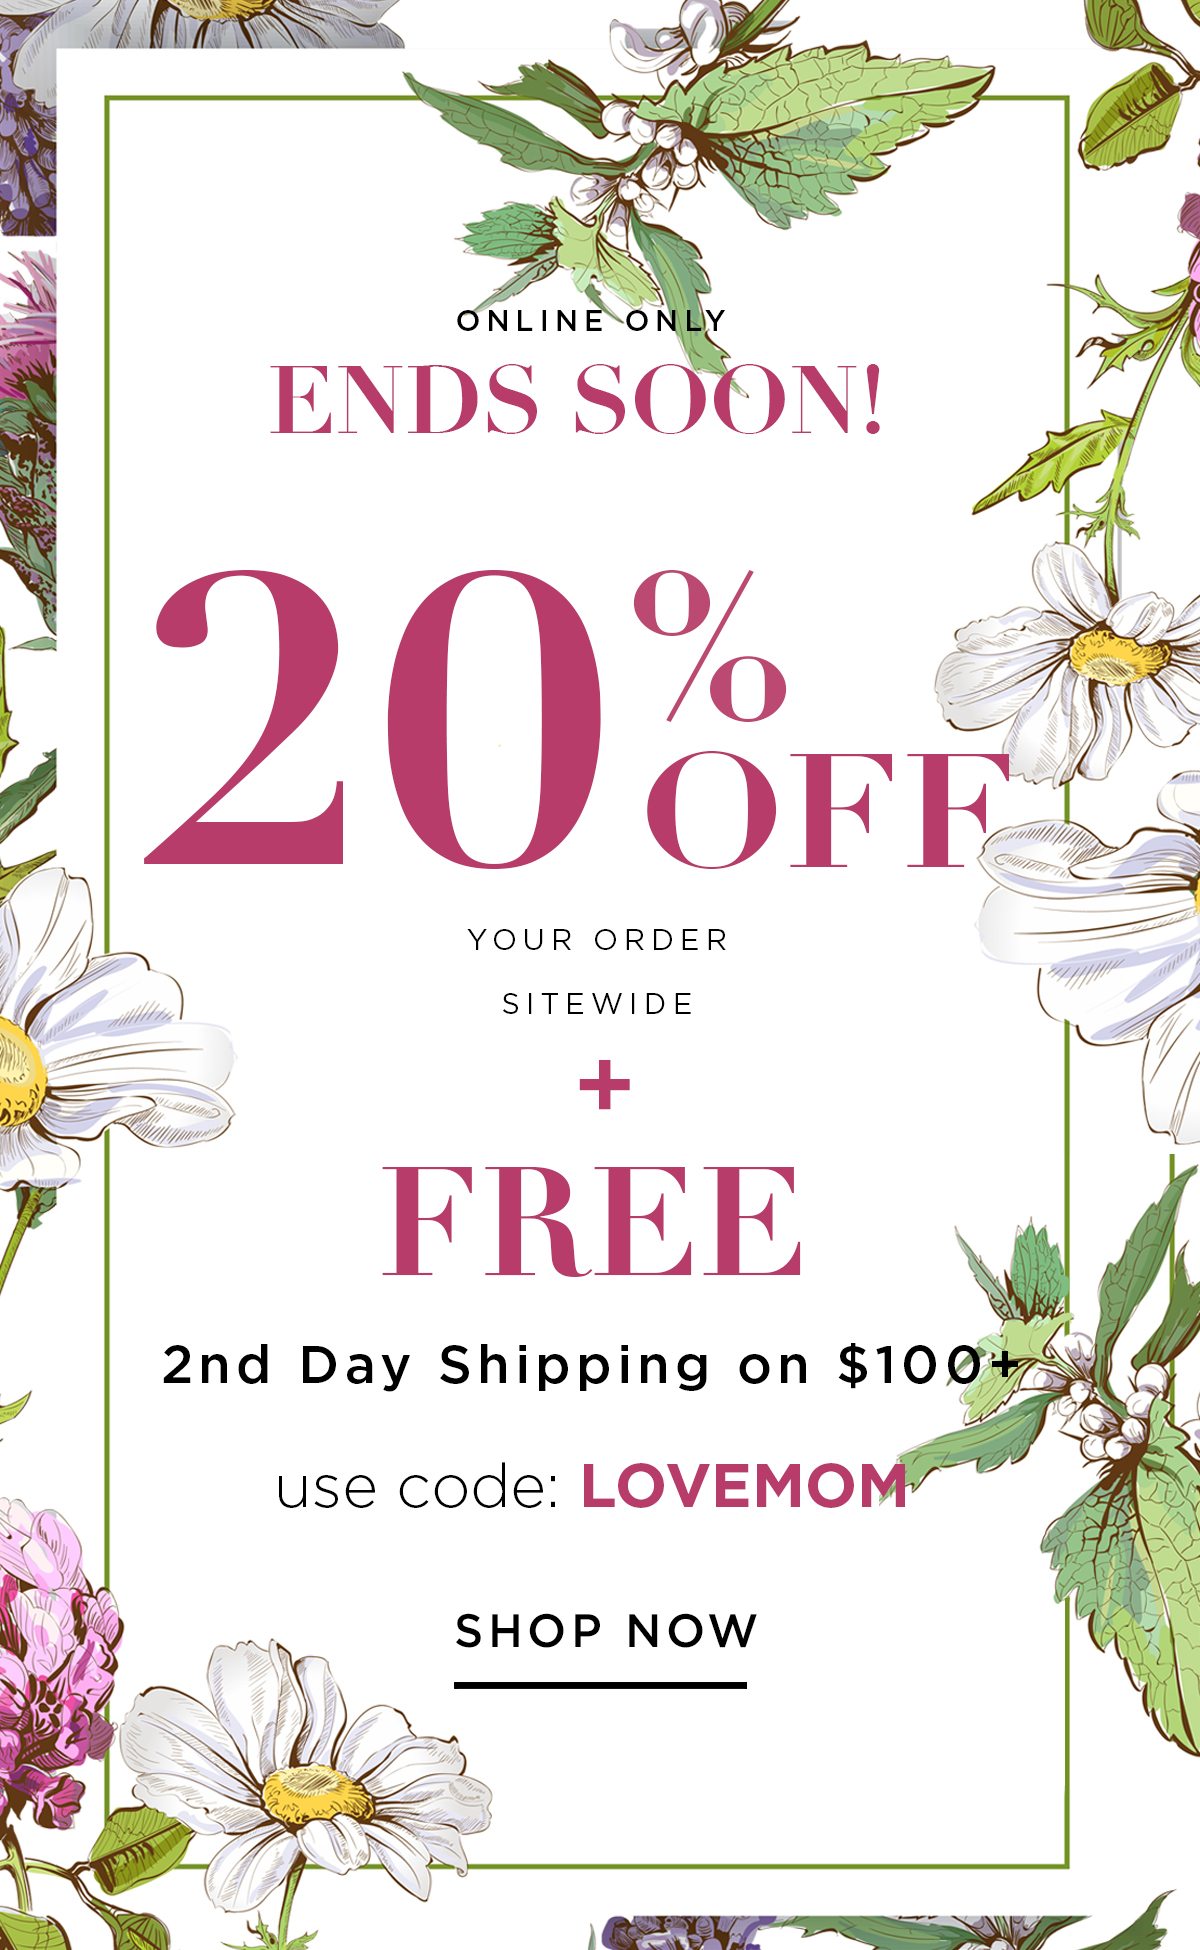 Online Only Ends Soon! 20% Off Your Order Sitewide + Free 2nd Day Shipping On $100+ Use Code: LOVEMOM- Show Now